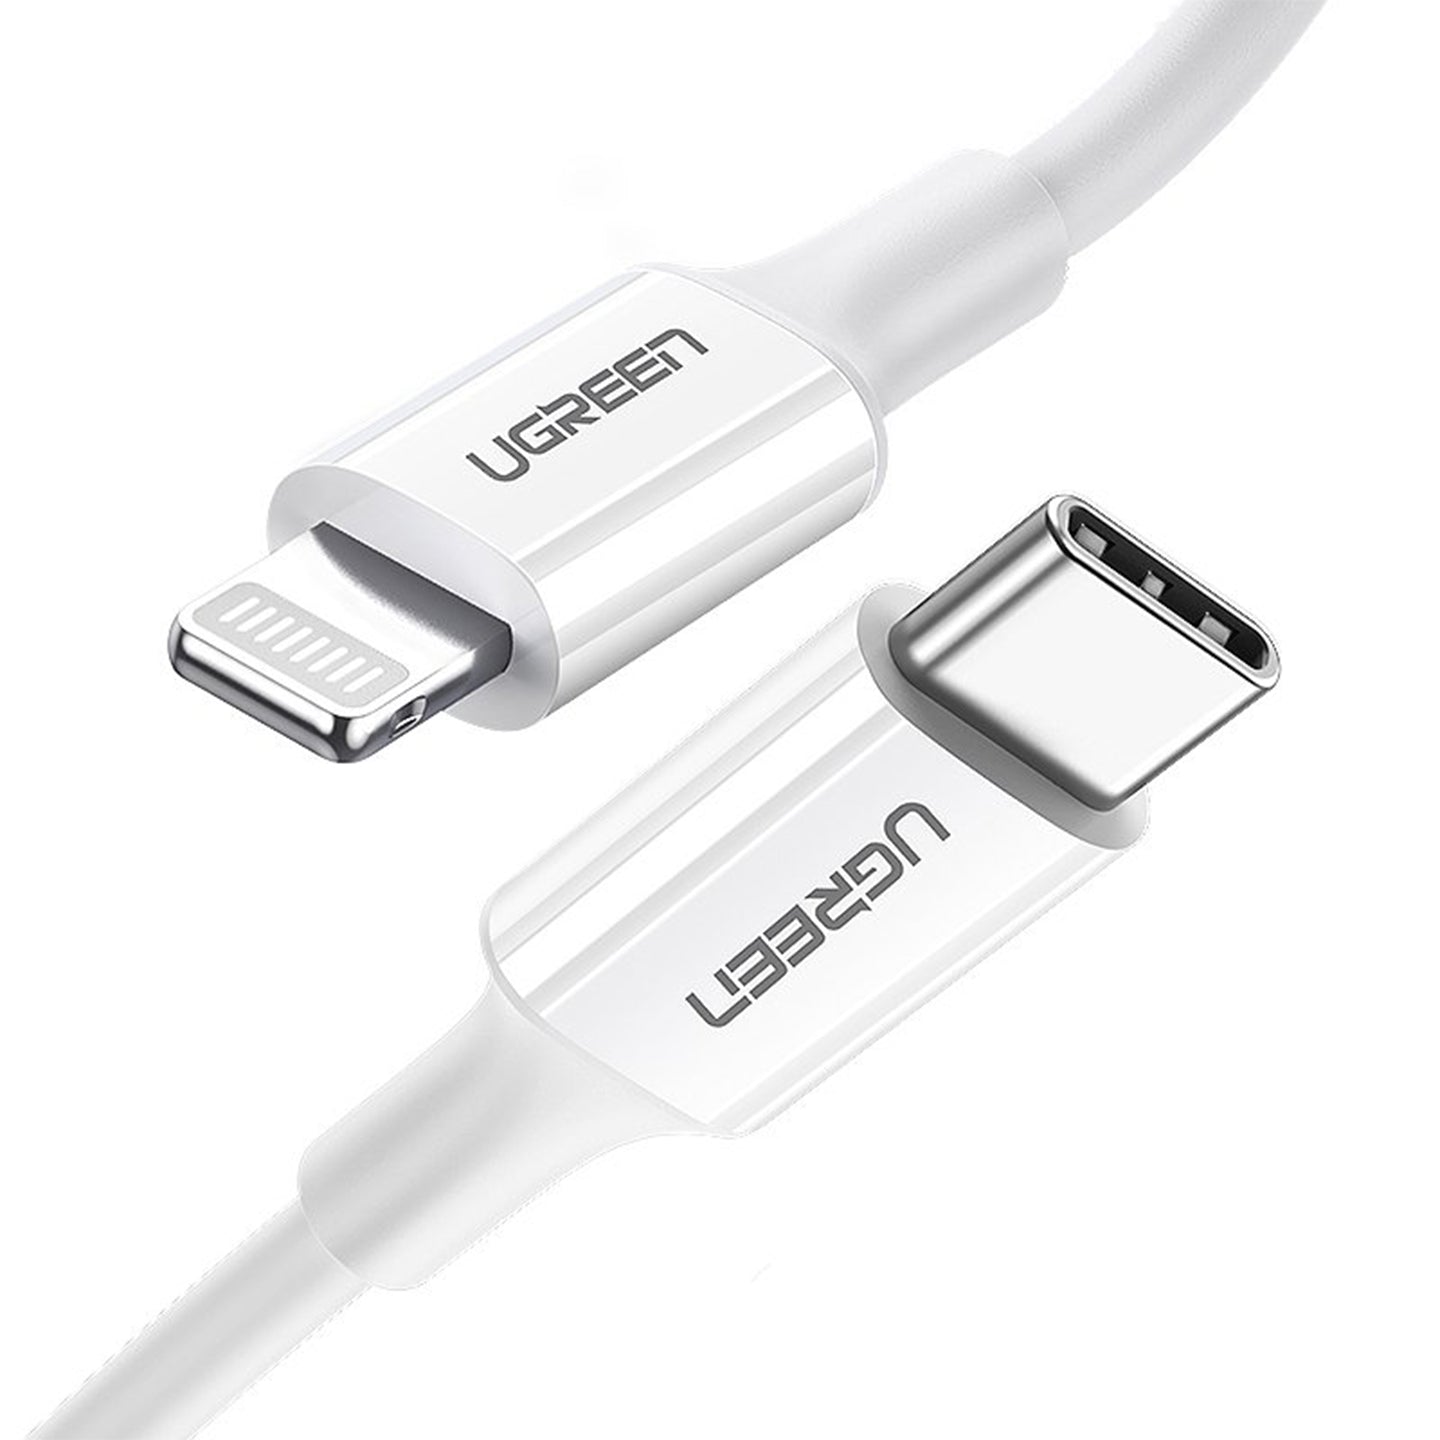 UGREEN Nickel Plated Lightning Cable, MFi,1m (white)